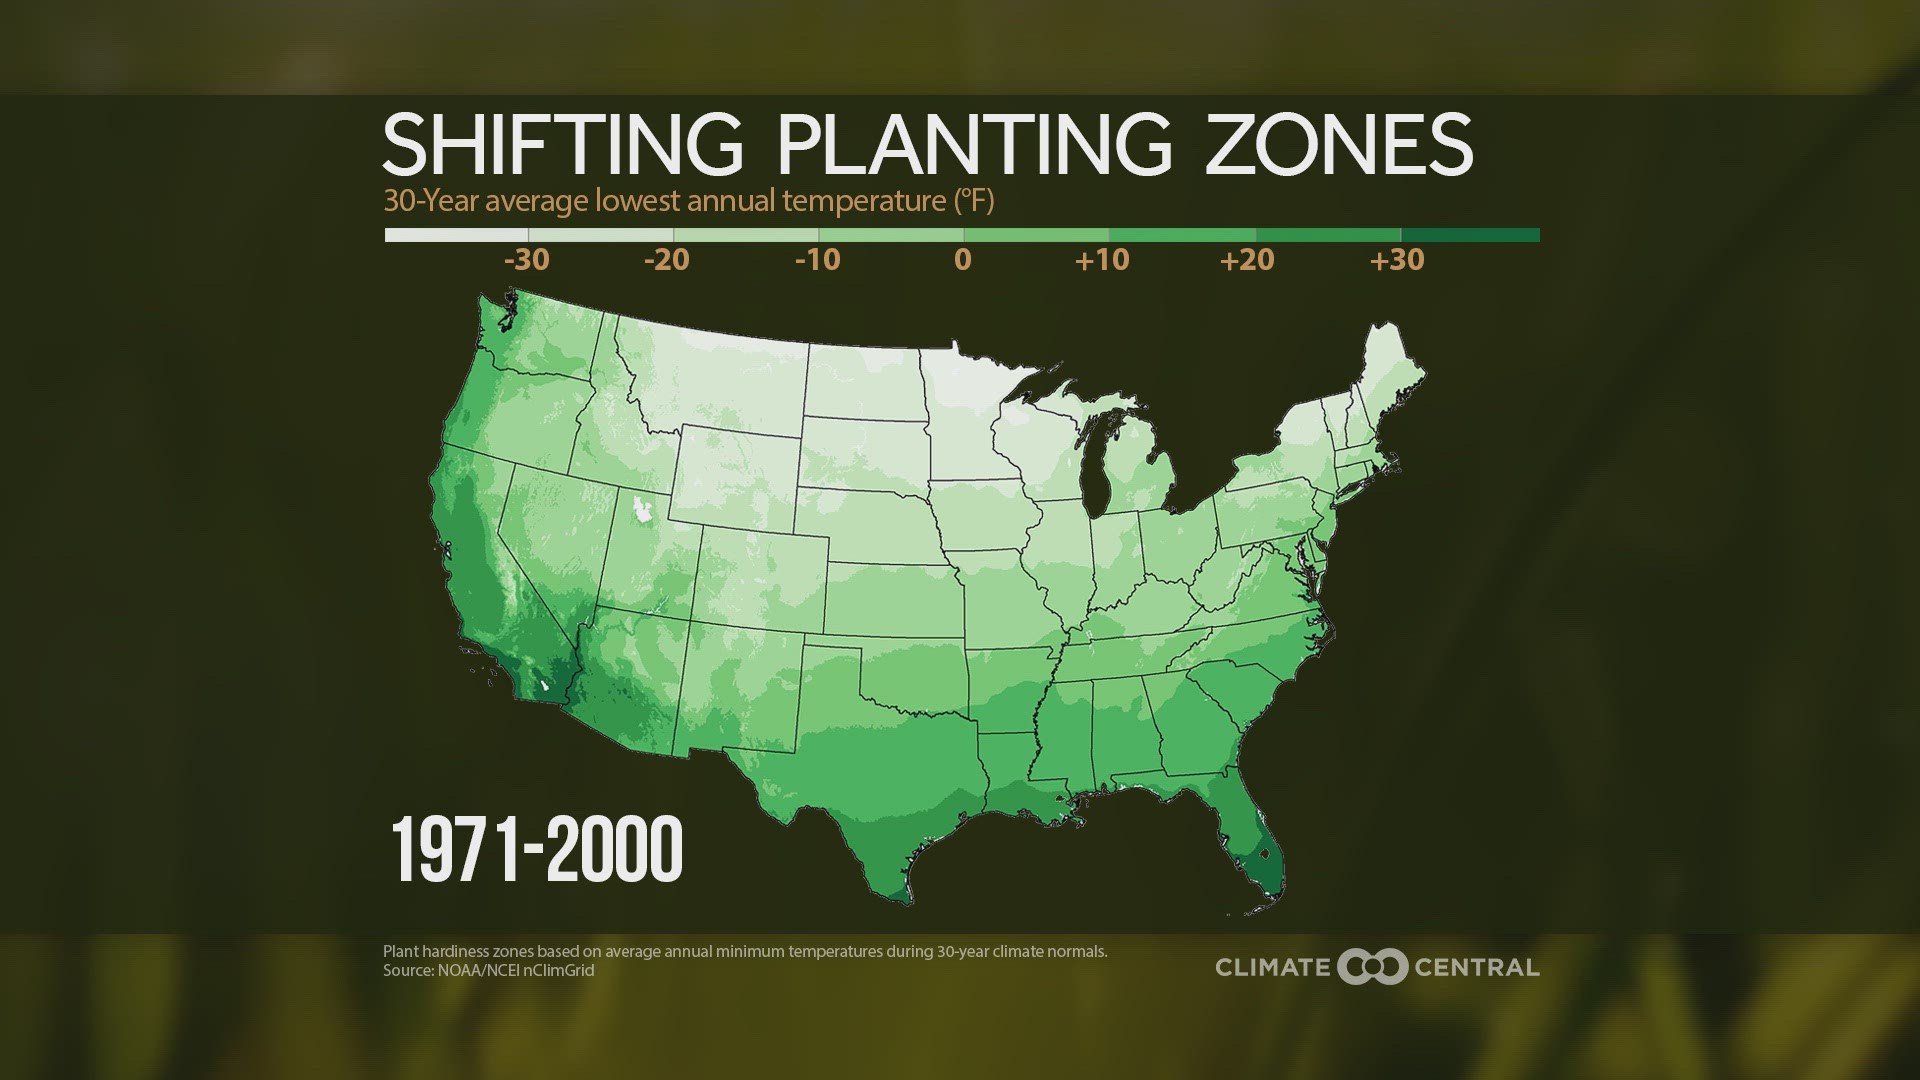 How plant hardiness zones are shifting